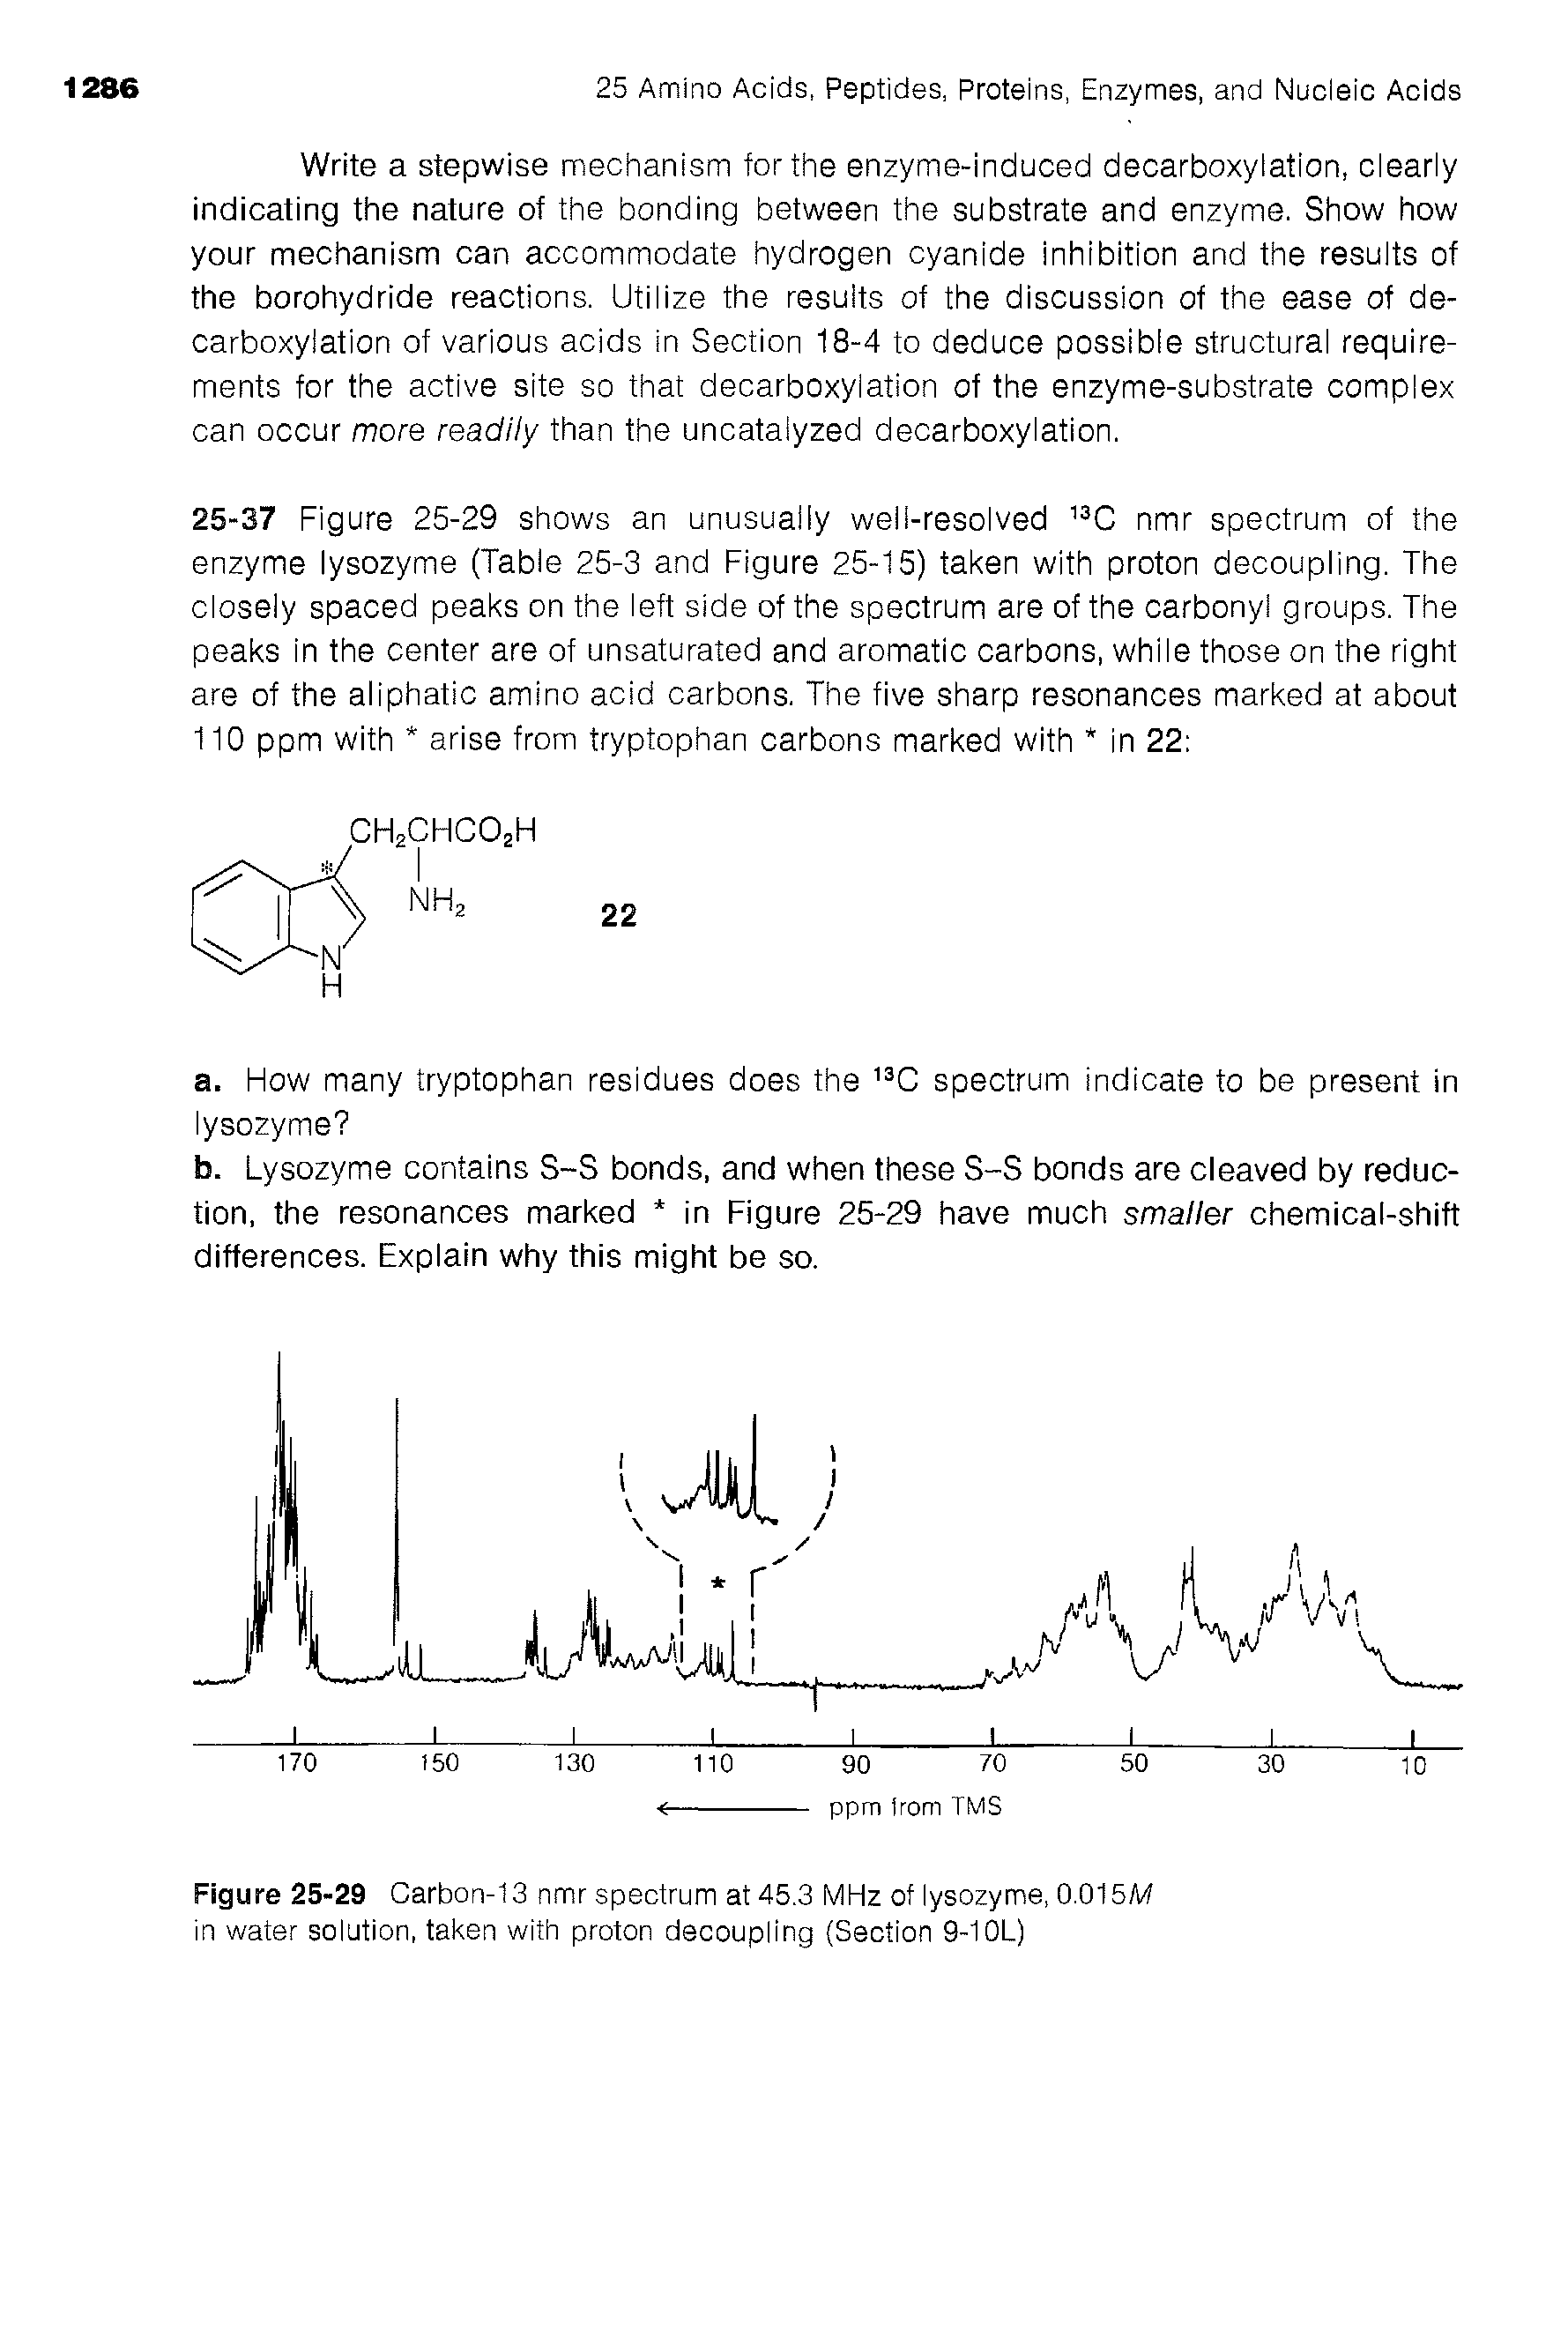 Figure 25-29 Carbon-13 nmr spectrum at 45.3 MHz of lysozyme, 0.015M in water solution, taken with proton decoupling (Section 9-10L)...